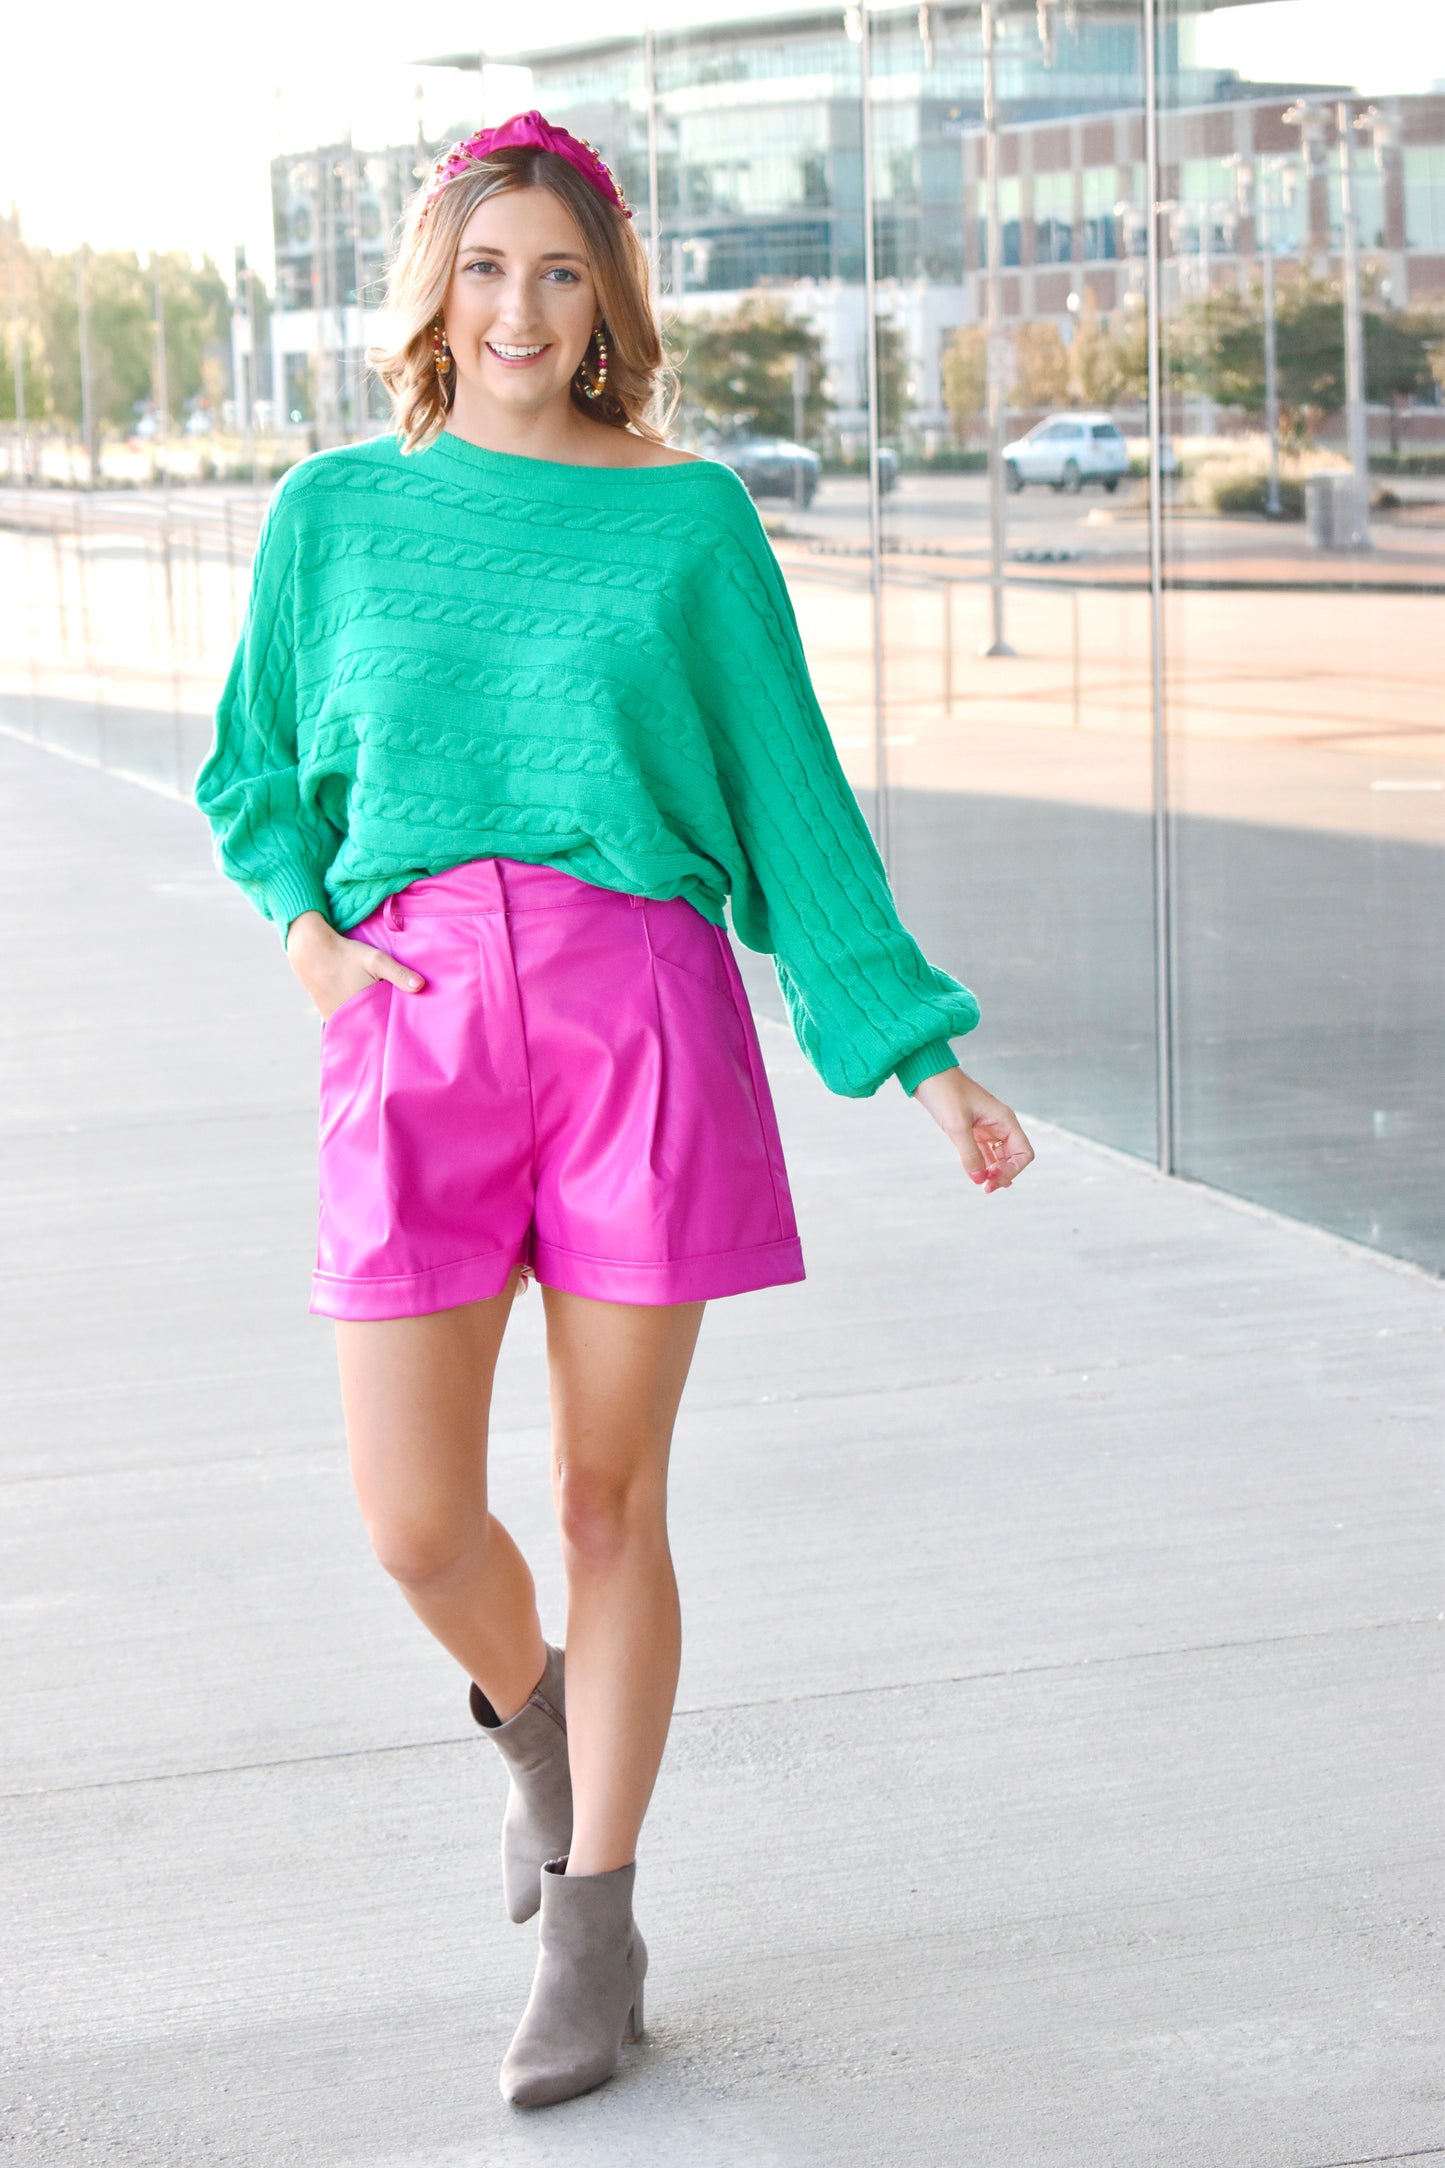 Load image into Gallery viewer, Kelly Green Cable Knit Dolman Sweater
